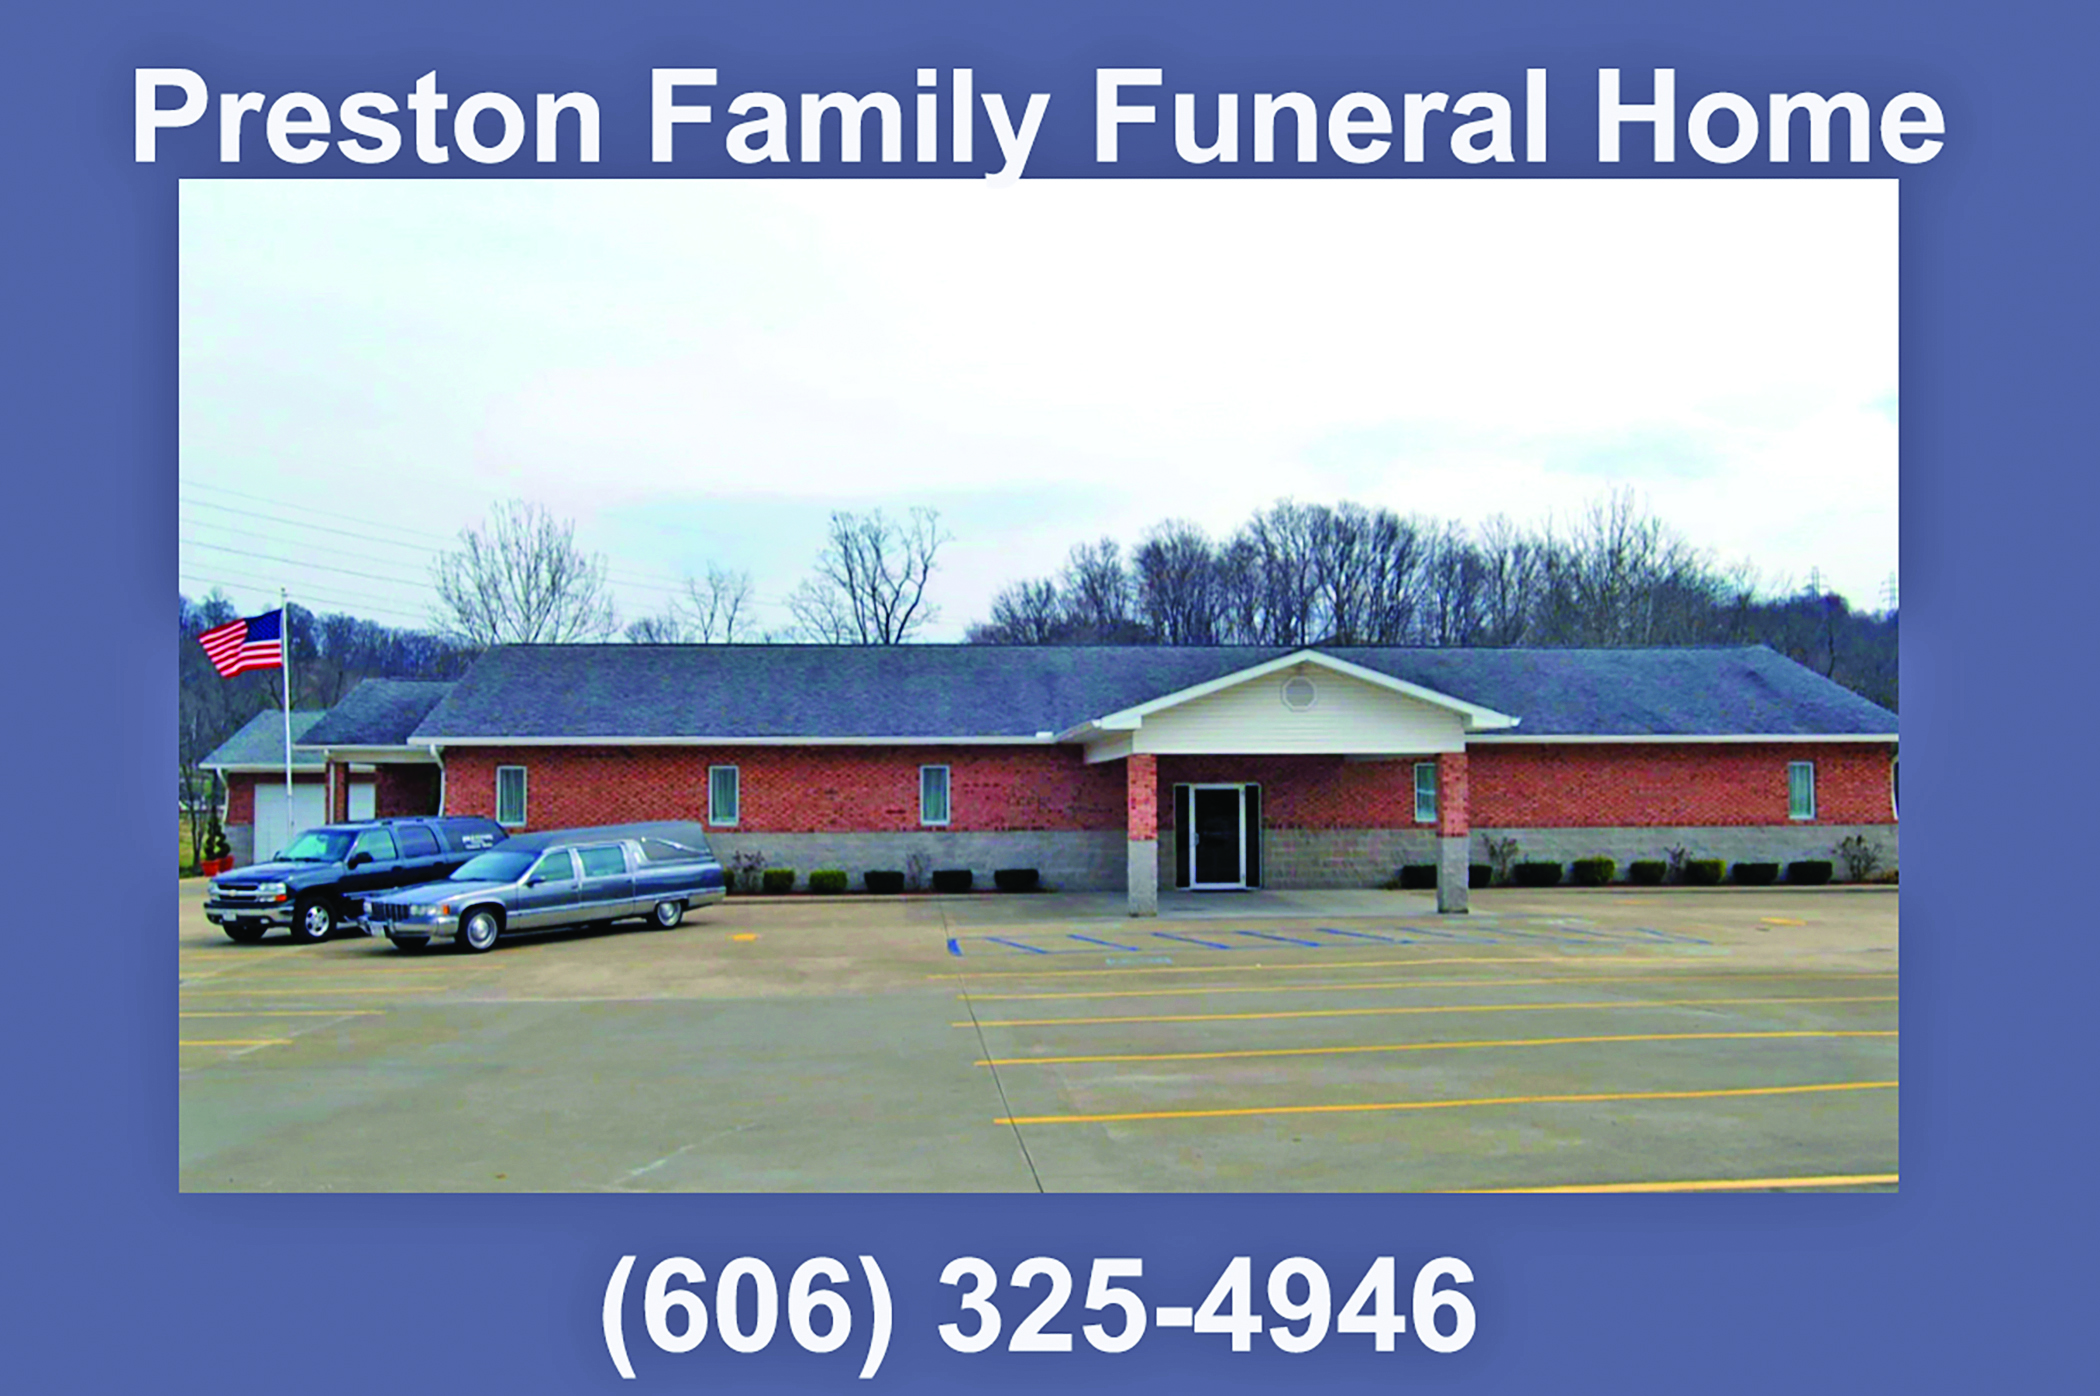 Preston Funeral Home: Not in It for the Accolades